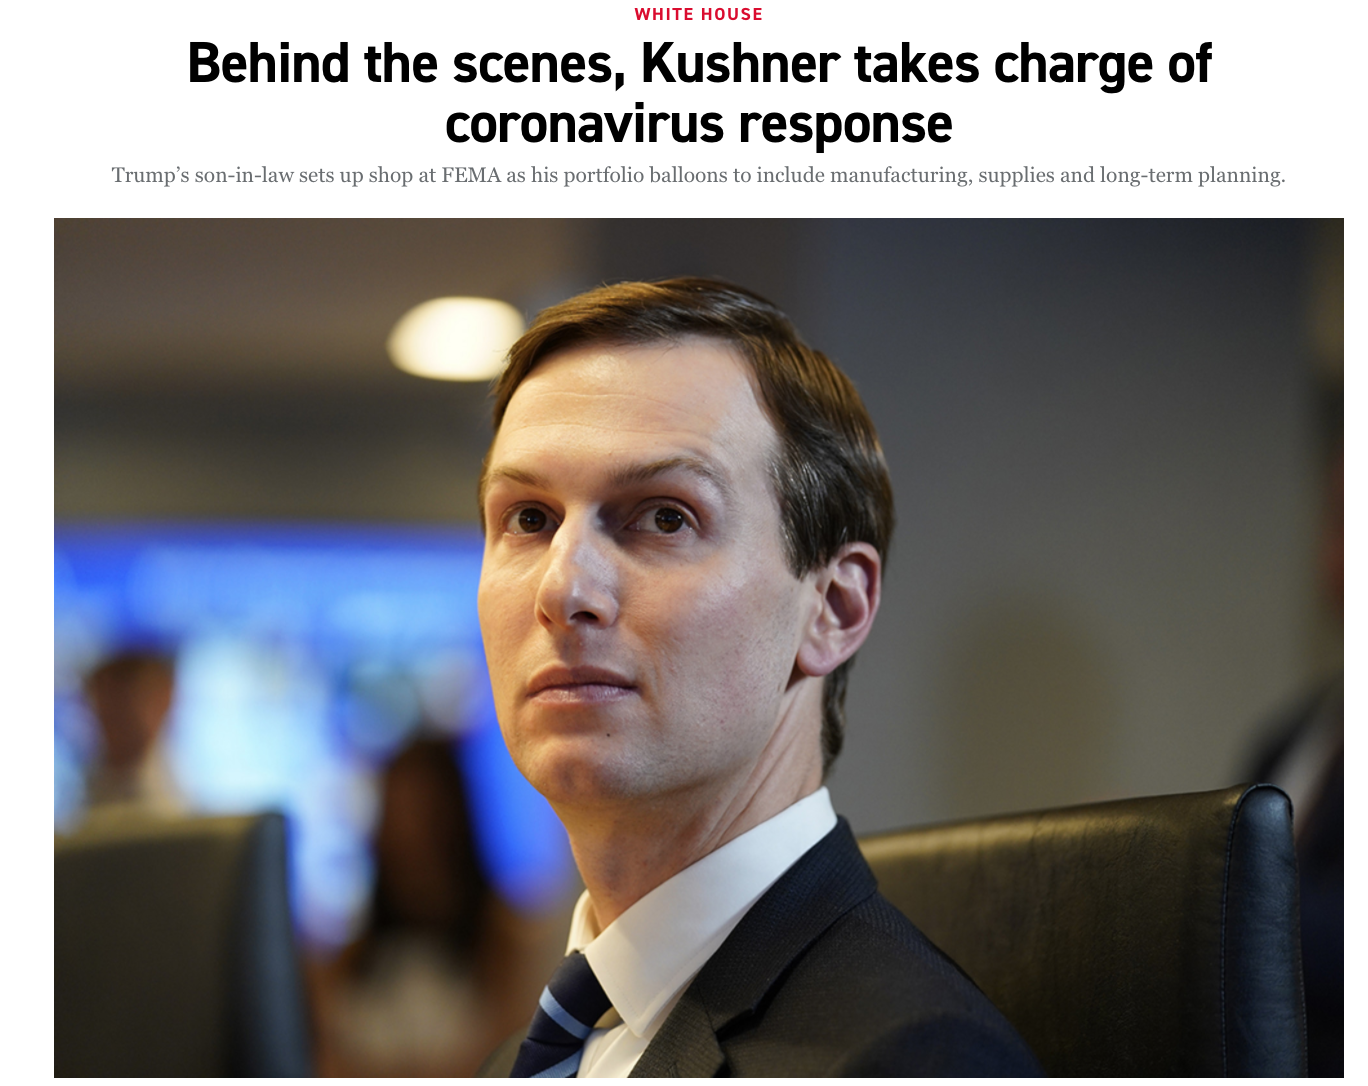 On the verge of peak tragedy, we have medical professionals, logistics professionals, Emergency Management professionals, but let's not use them.  Isn't he supposed to be solving peace in the Middle East and Addiction and Criminal Justice Reform? https://www.politico.com/news/2020/04/01/jared-kushner-coronavirus-response-160553